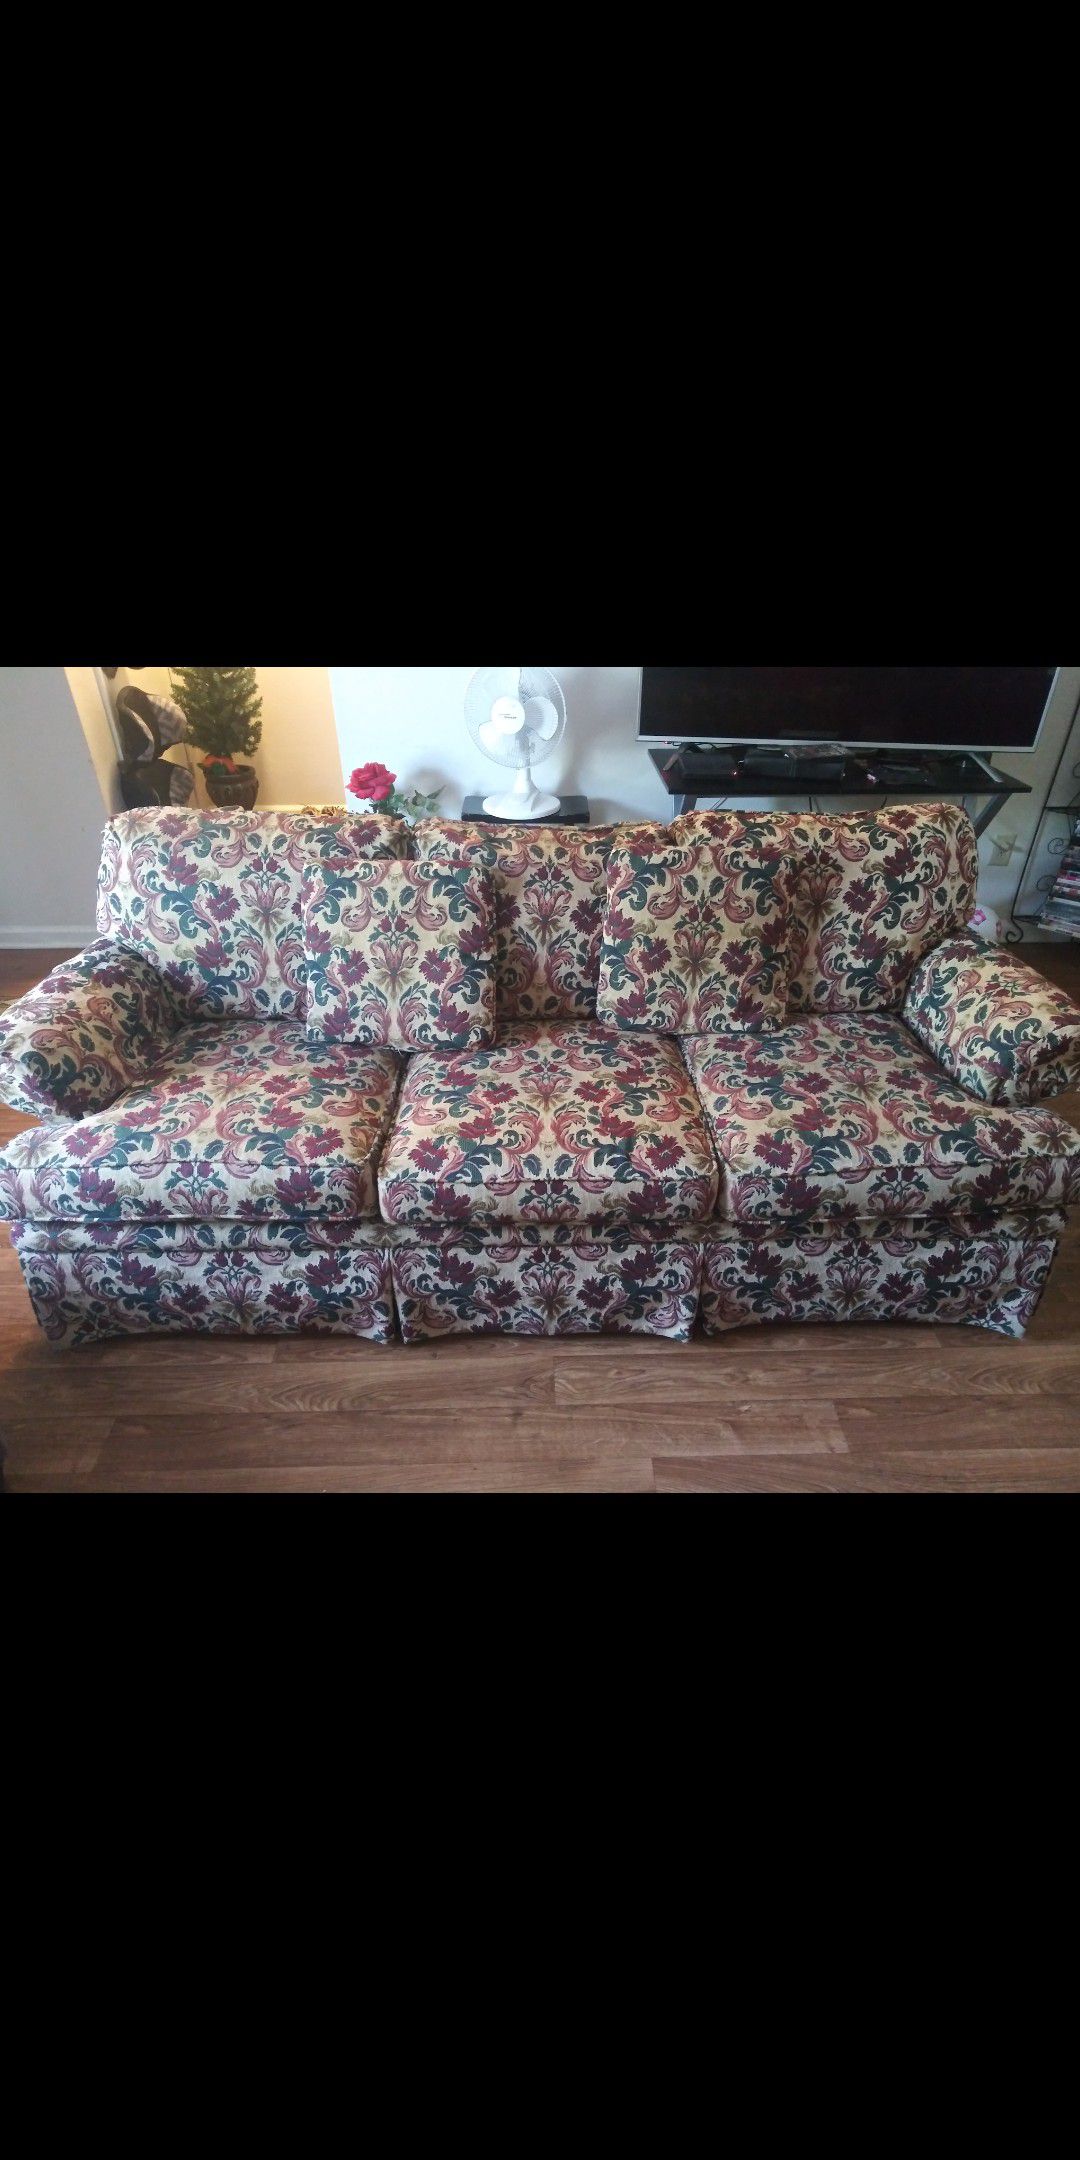 Floral couch smoke pet free $50 get it today